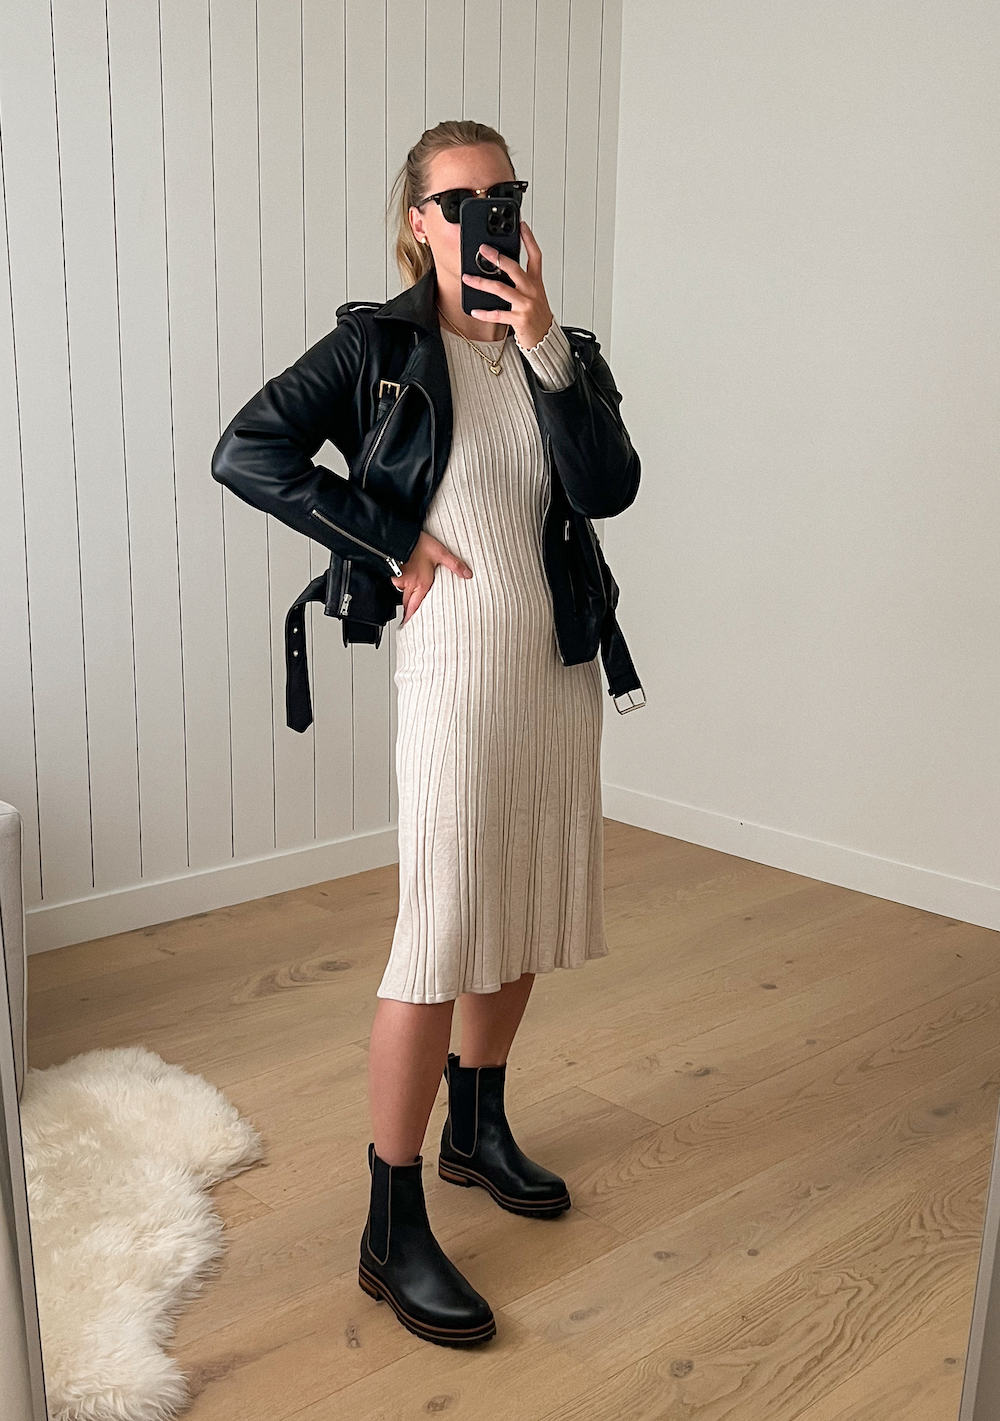 Christal wearing a cream sweater dress with a black leather jacket and Chelsea boots.